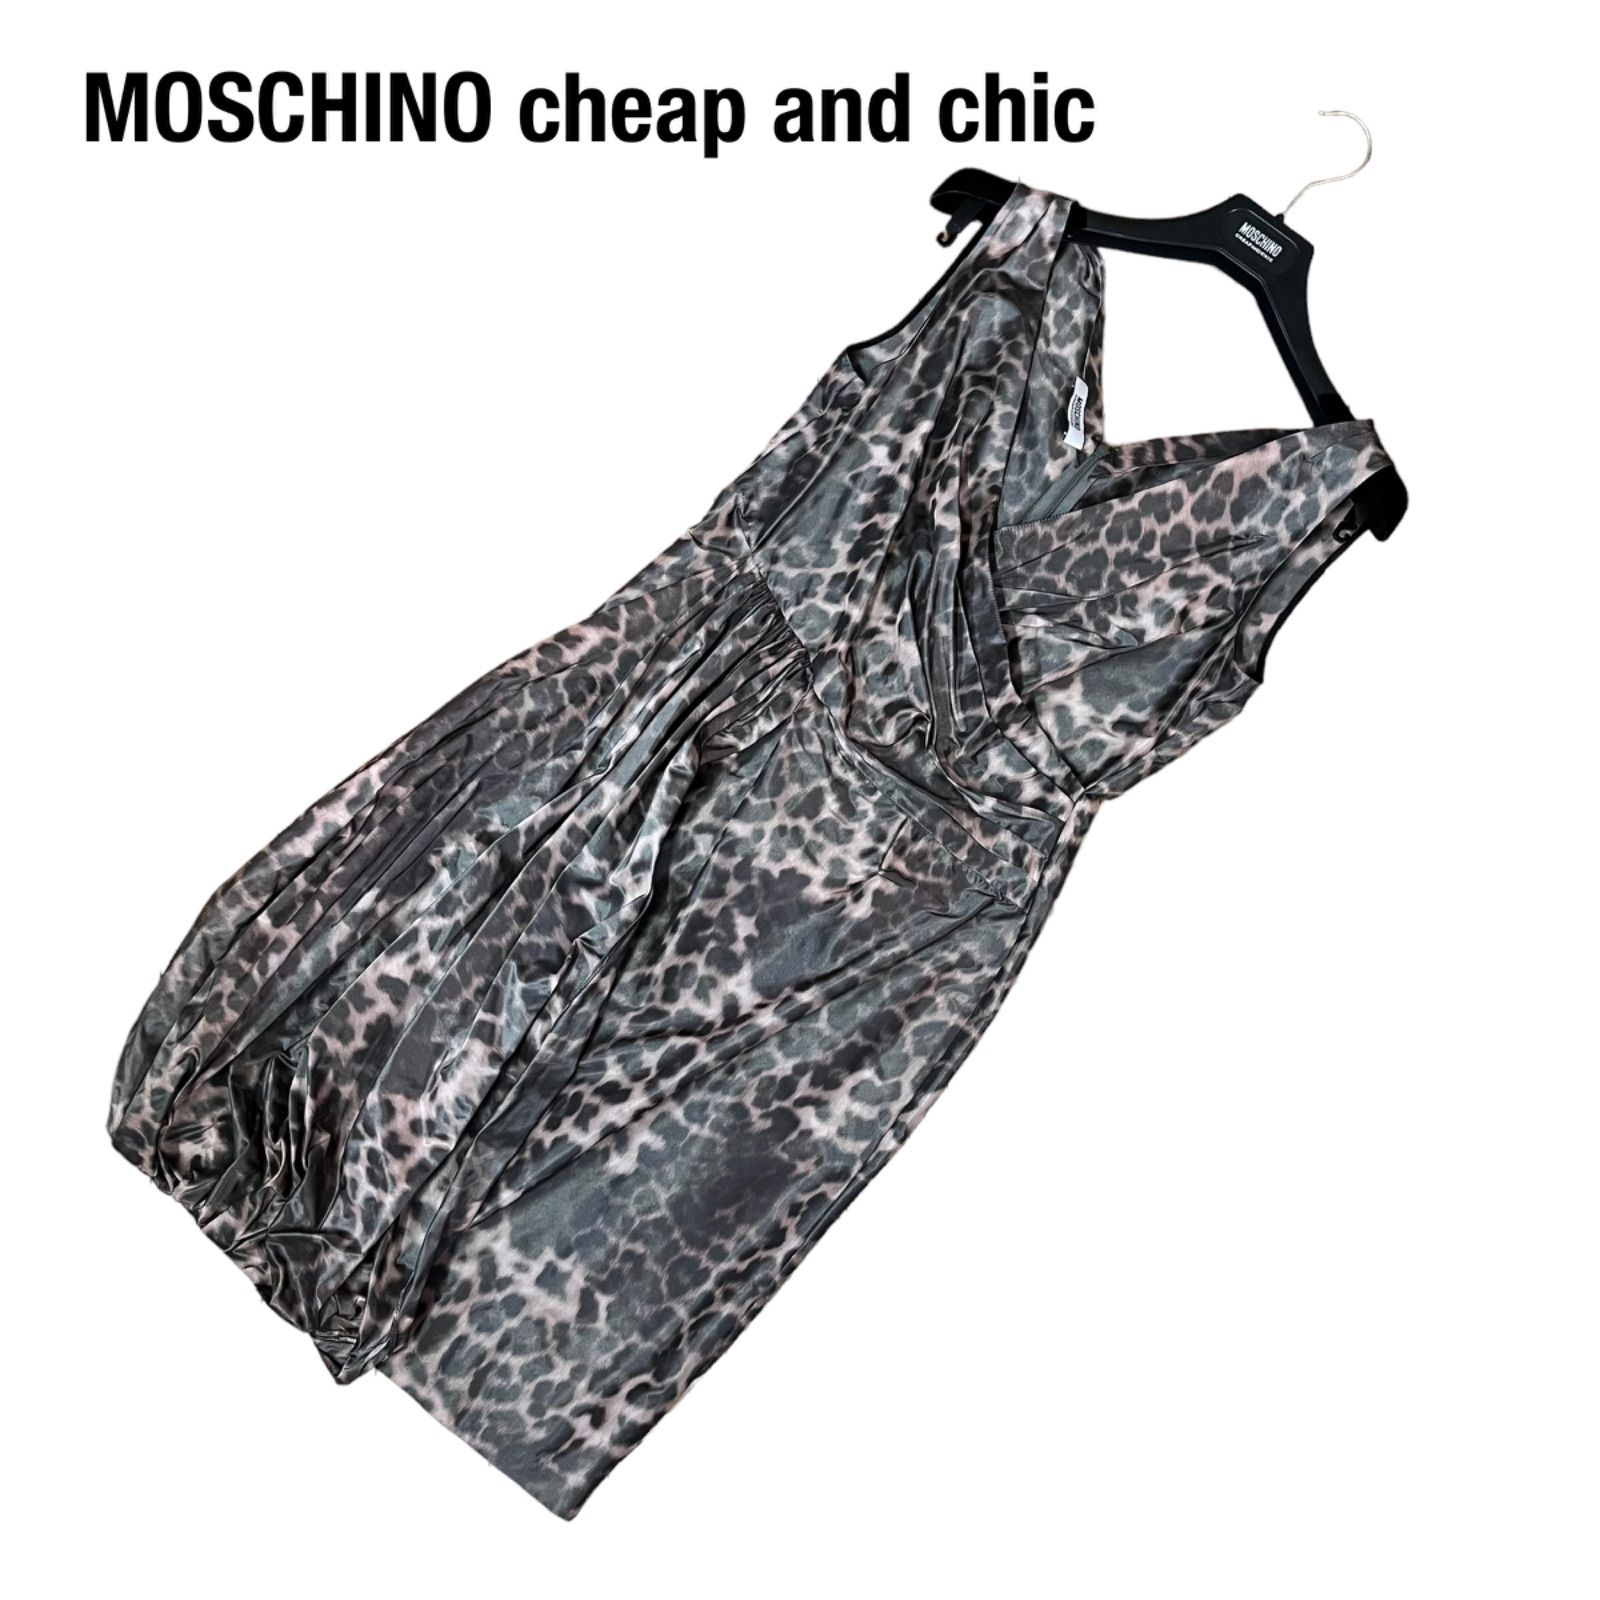 MOSCHINO　cheap and chic モスキーノ　ワンピース　ルネ